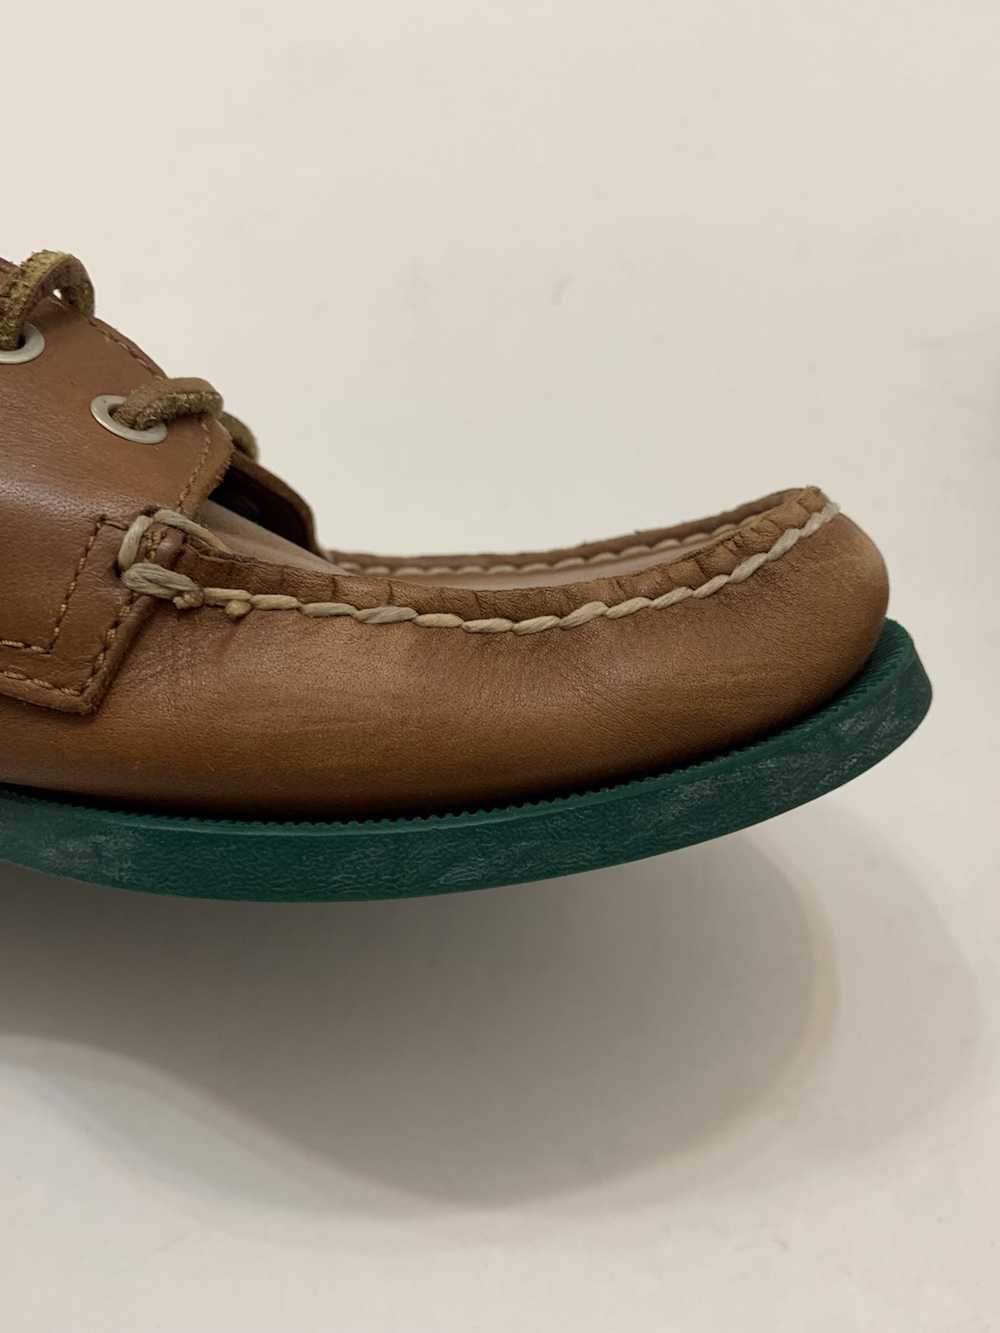 Sperry SPERRY TOP SIDER LEATHER BOAT SHOES - image 11